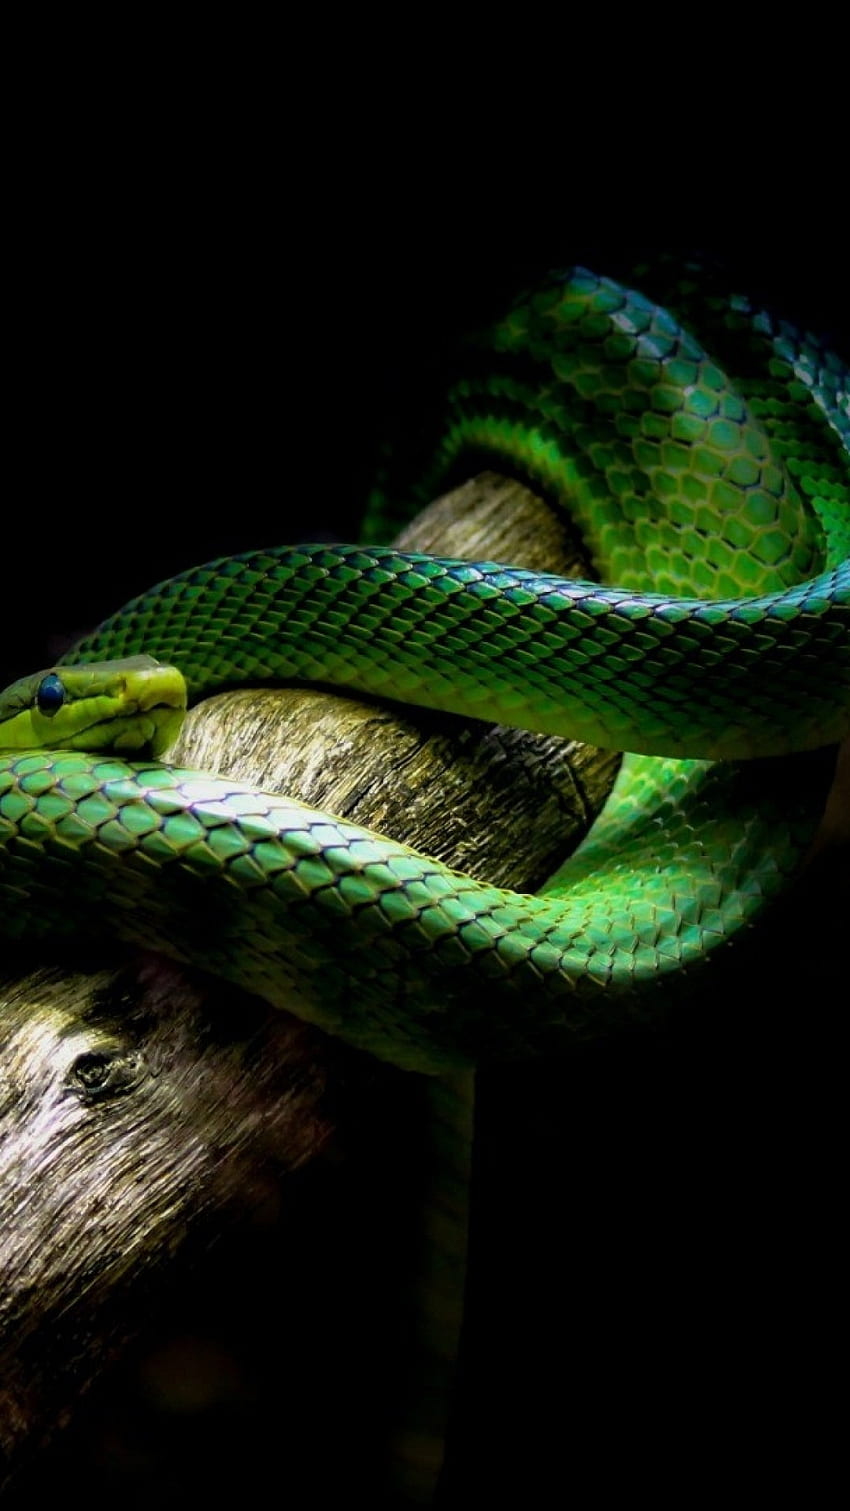 Green Snake, Viper for iPhone 8, iPhone 7 Plus, iPhone 6+, Sony Xperia Z, HTC One HD phone wallpaper